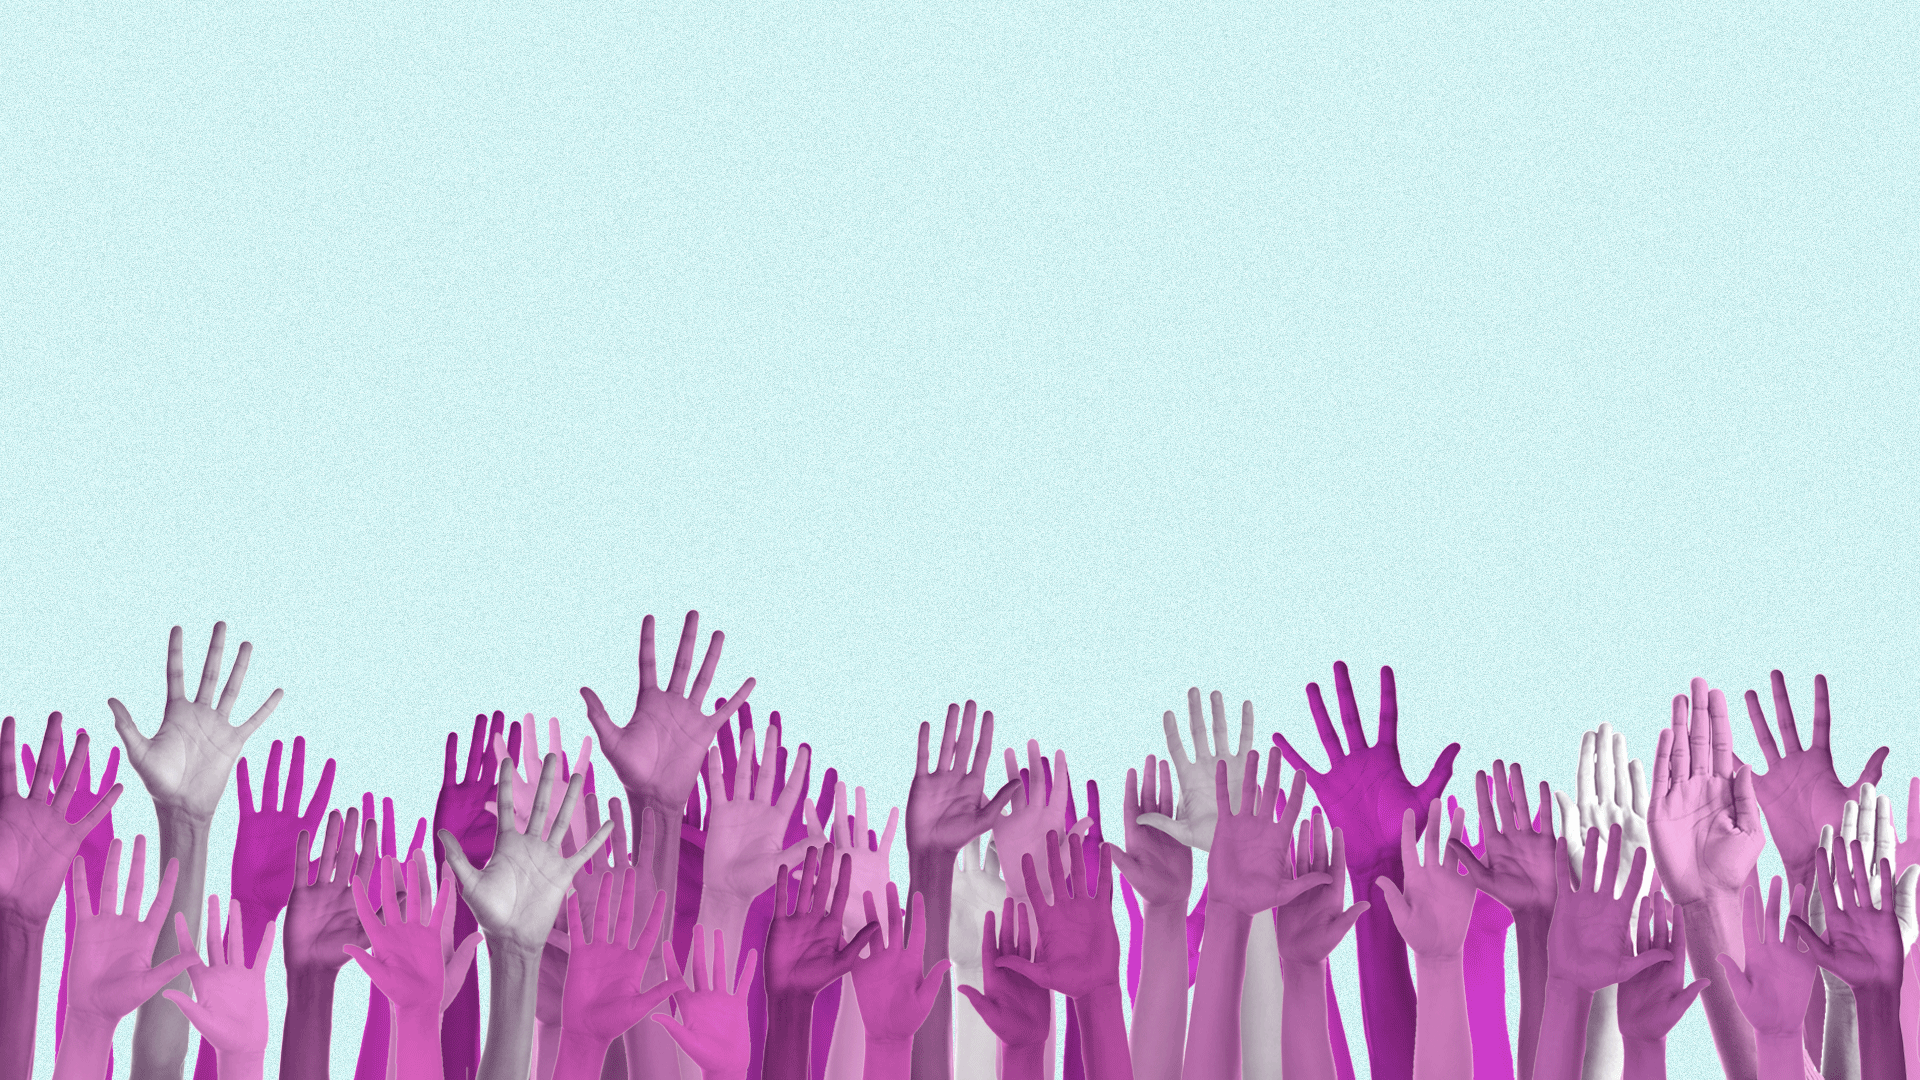 Illustration of a line of hands raised up in the air.